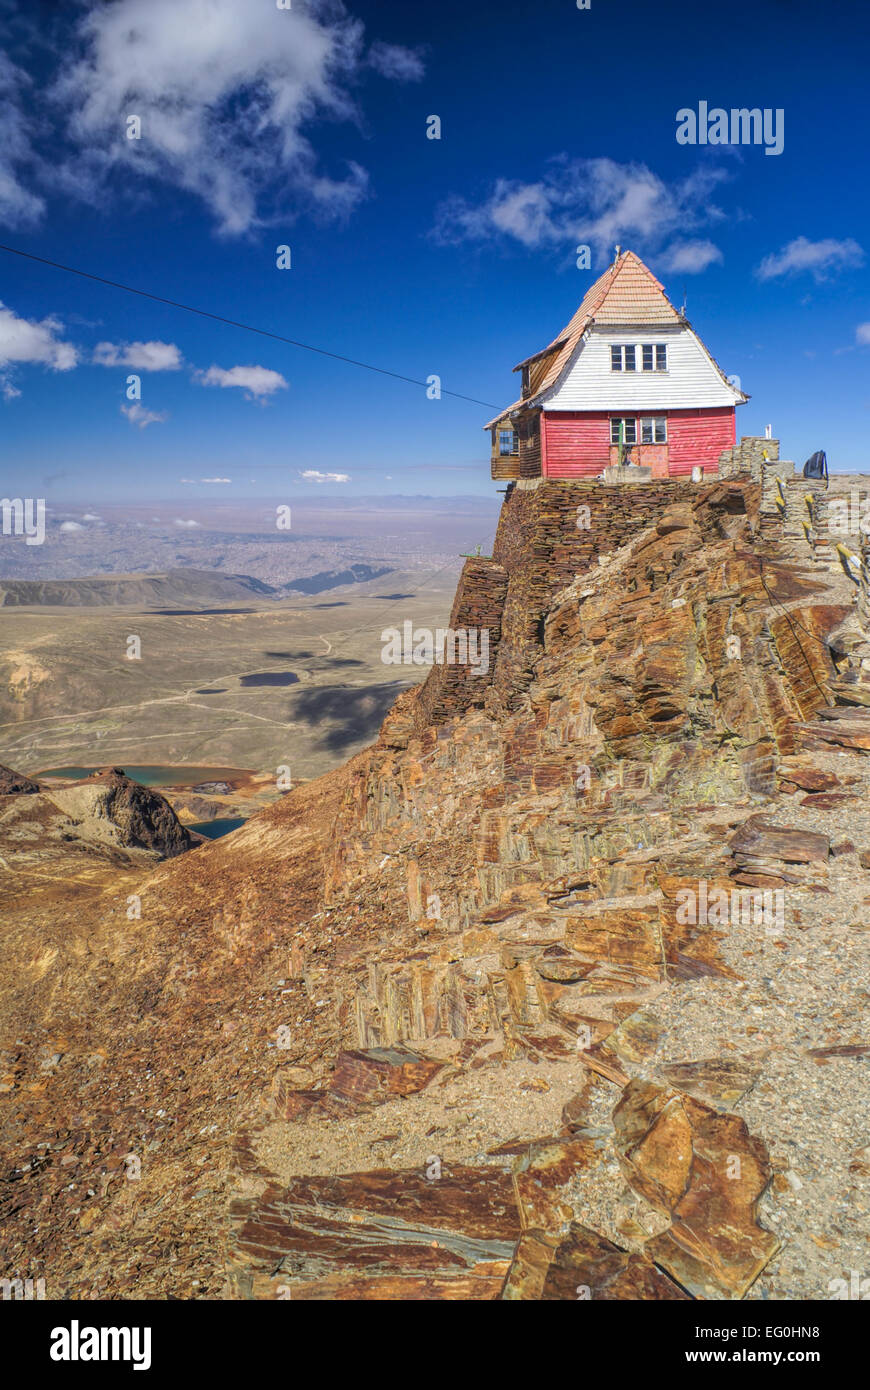 Wooden hut on the edge of cliff on mountain Chacaltaya in south american Andes Stock Photo